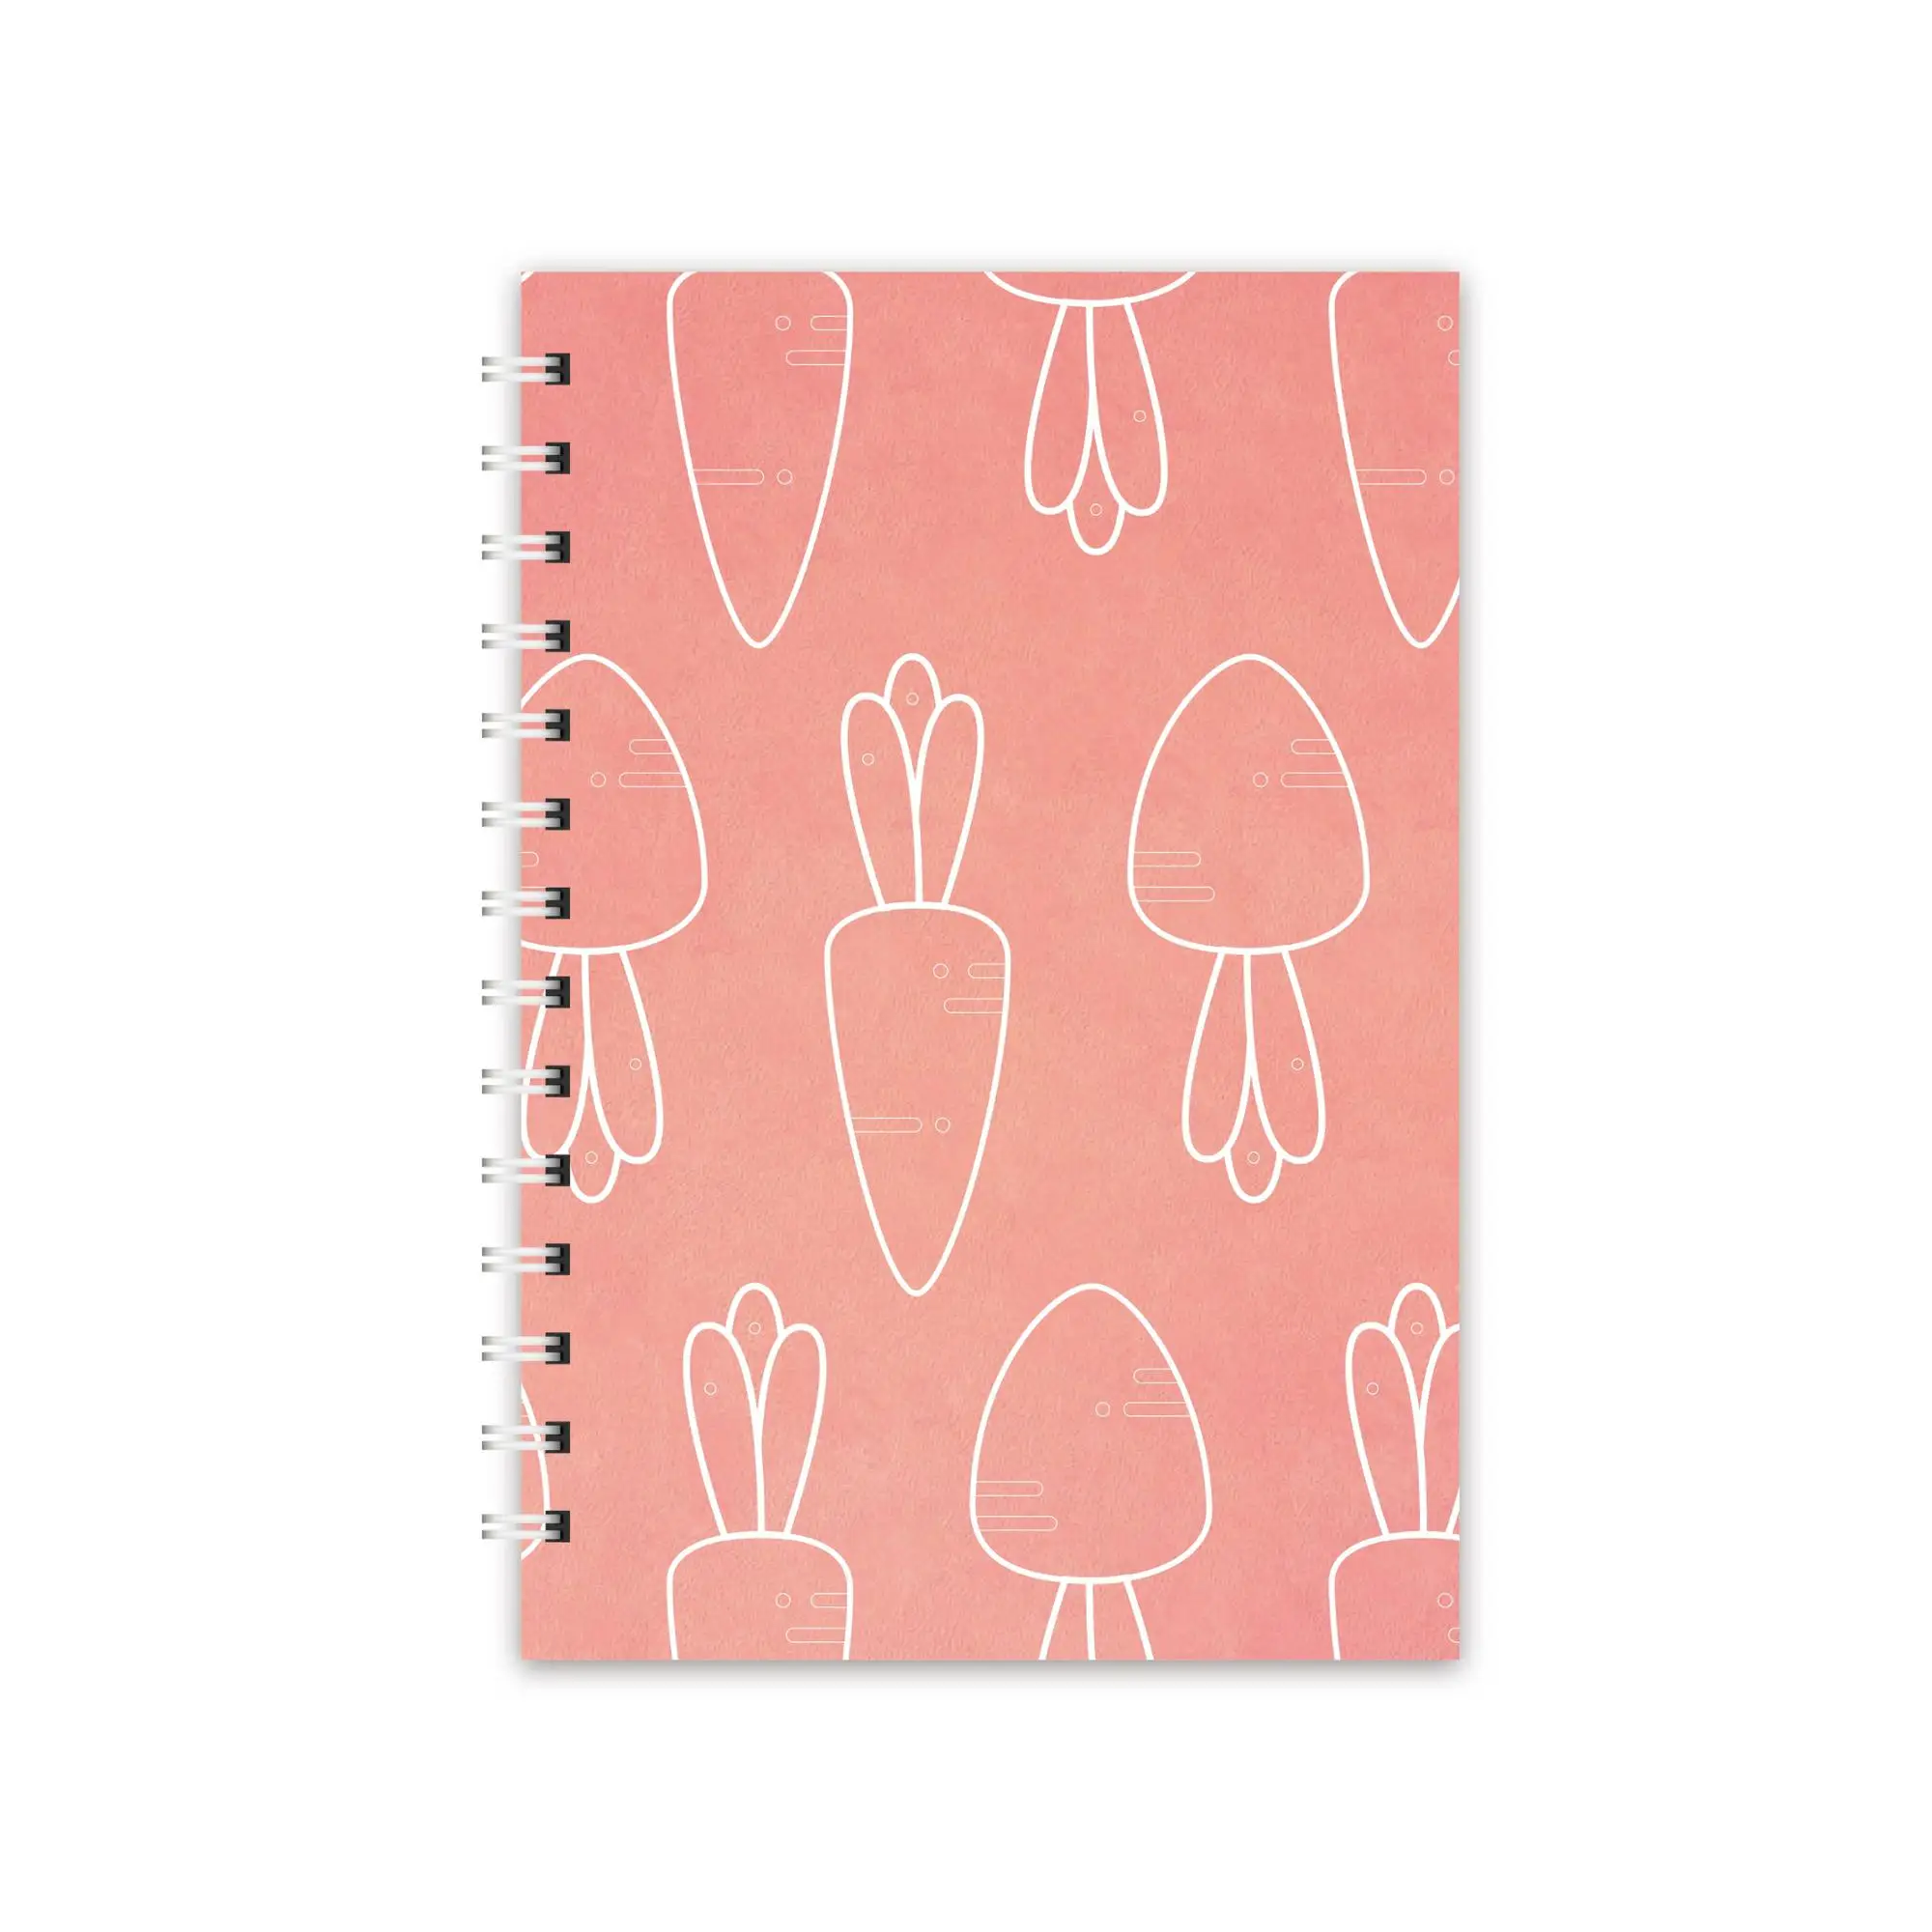 High Quality Cute Children Design Spiral Paper Cover Pink Pineapple Pattern Notebbok 2018 Planner